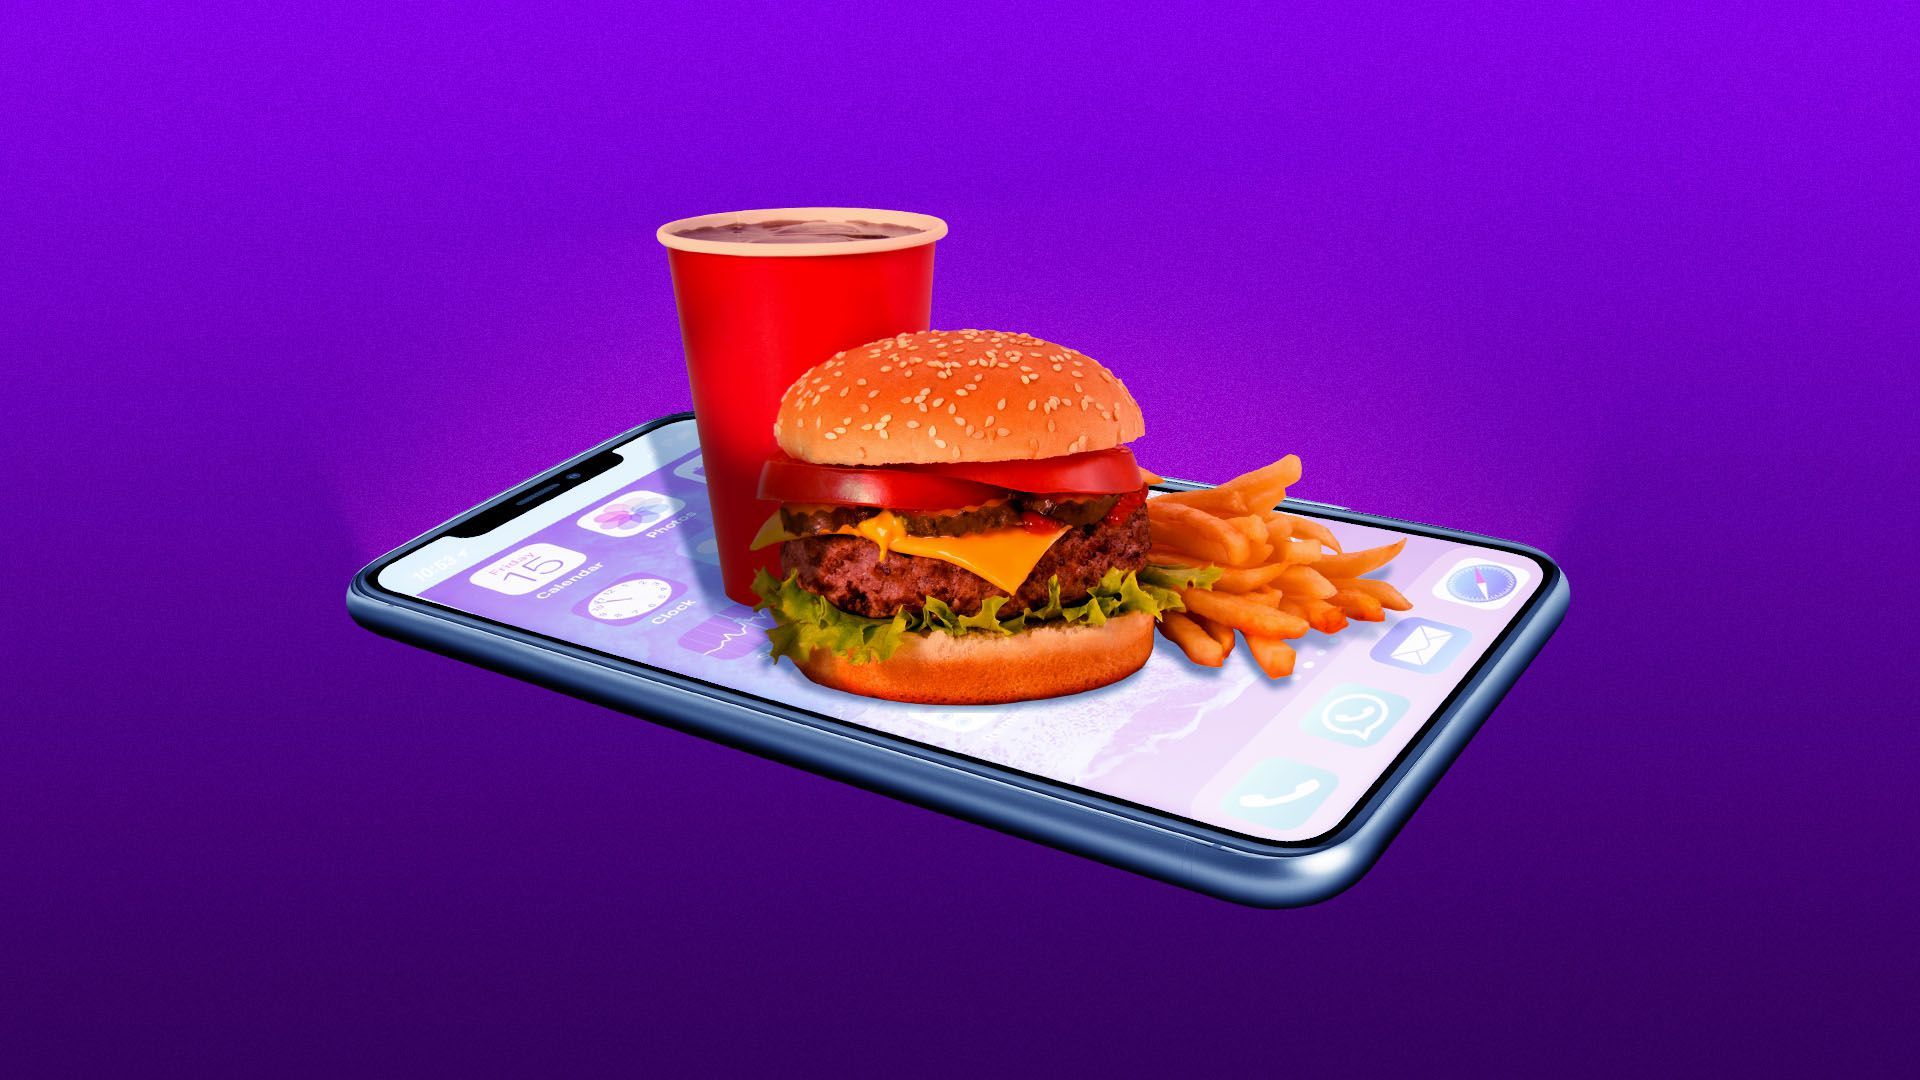 Illustration of a burger, drink, and fries, sitting on a cell phone as if it were a tray